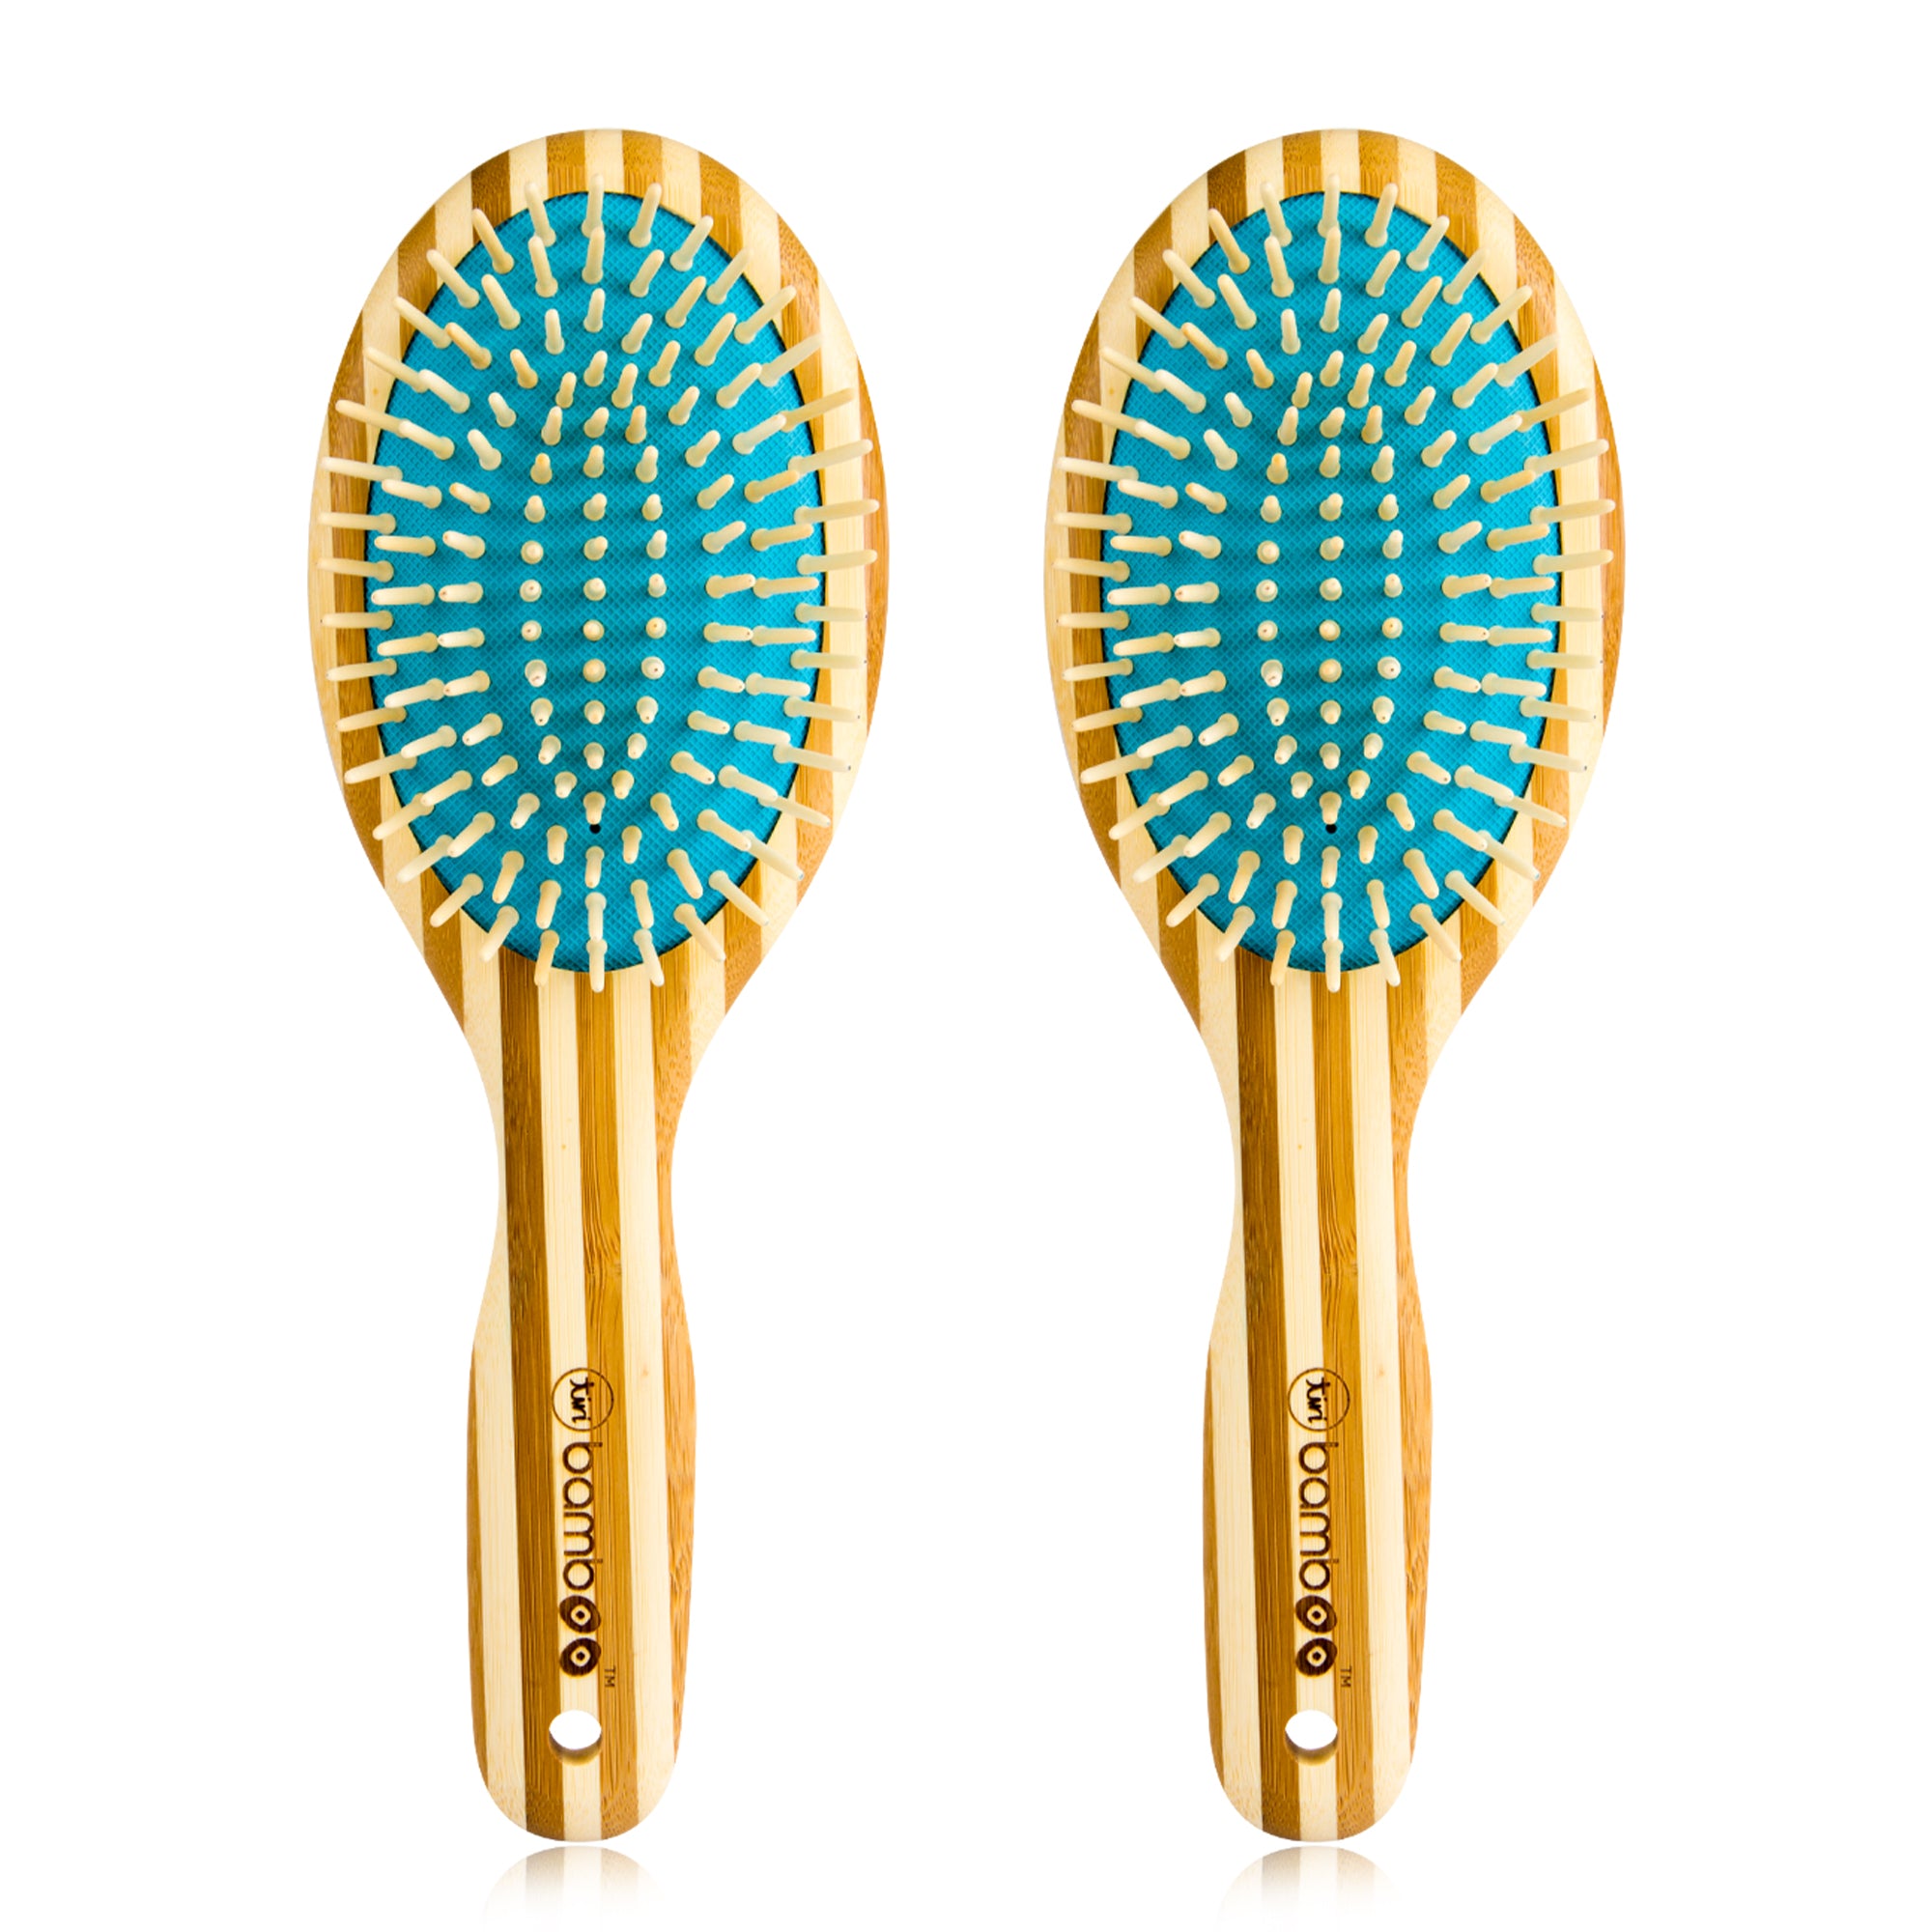 (Value 2-Pack) Sustainable Bamboo Hair Brush with Natural Bristles